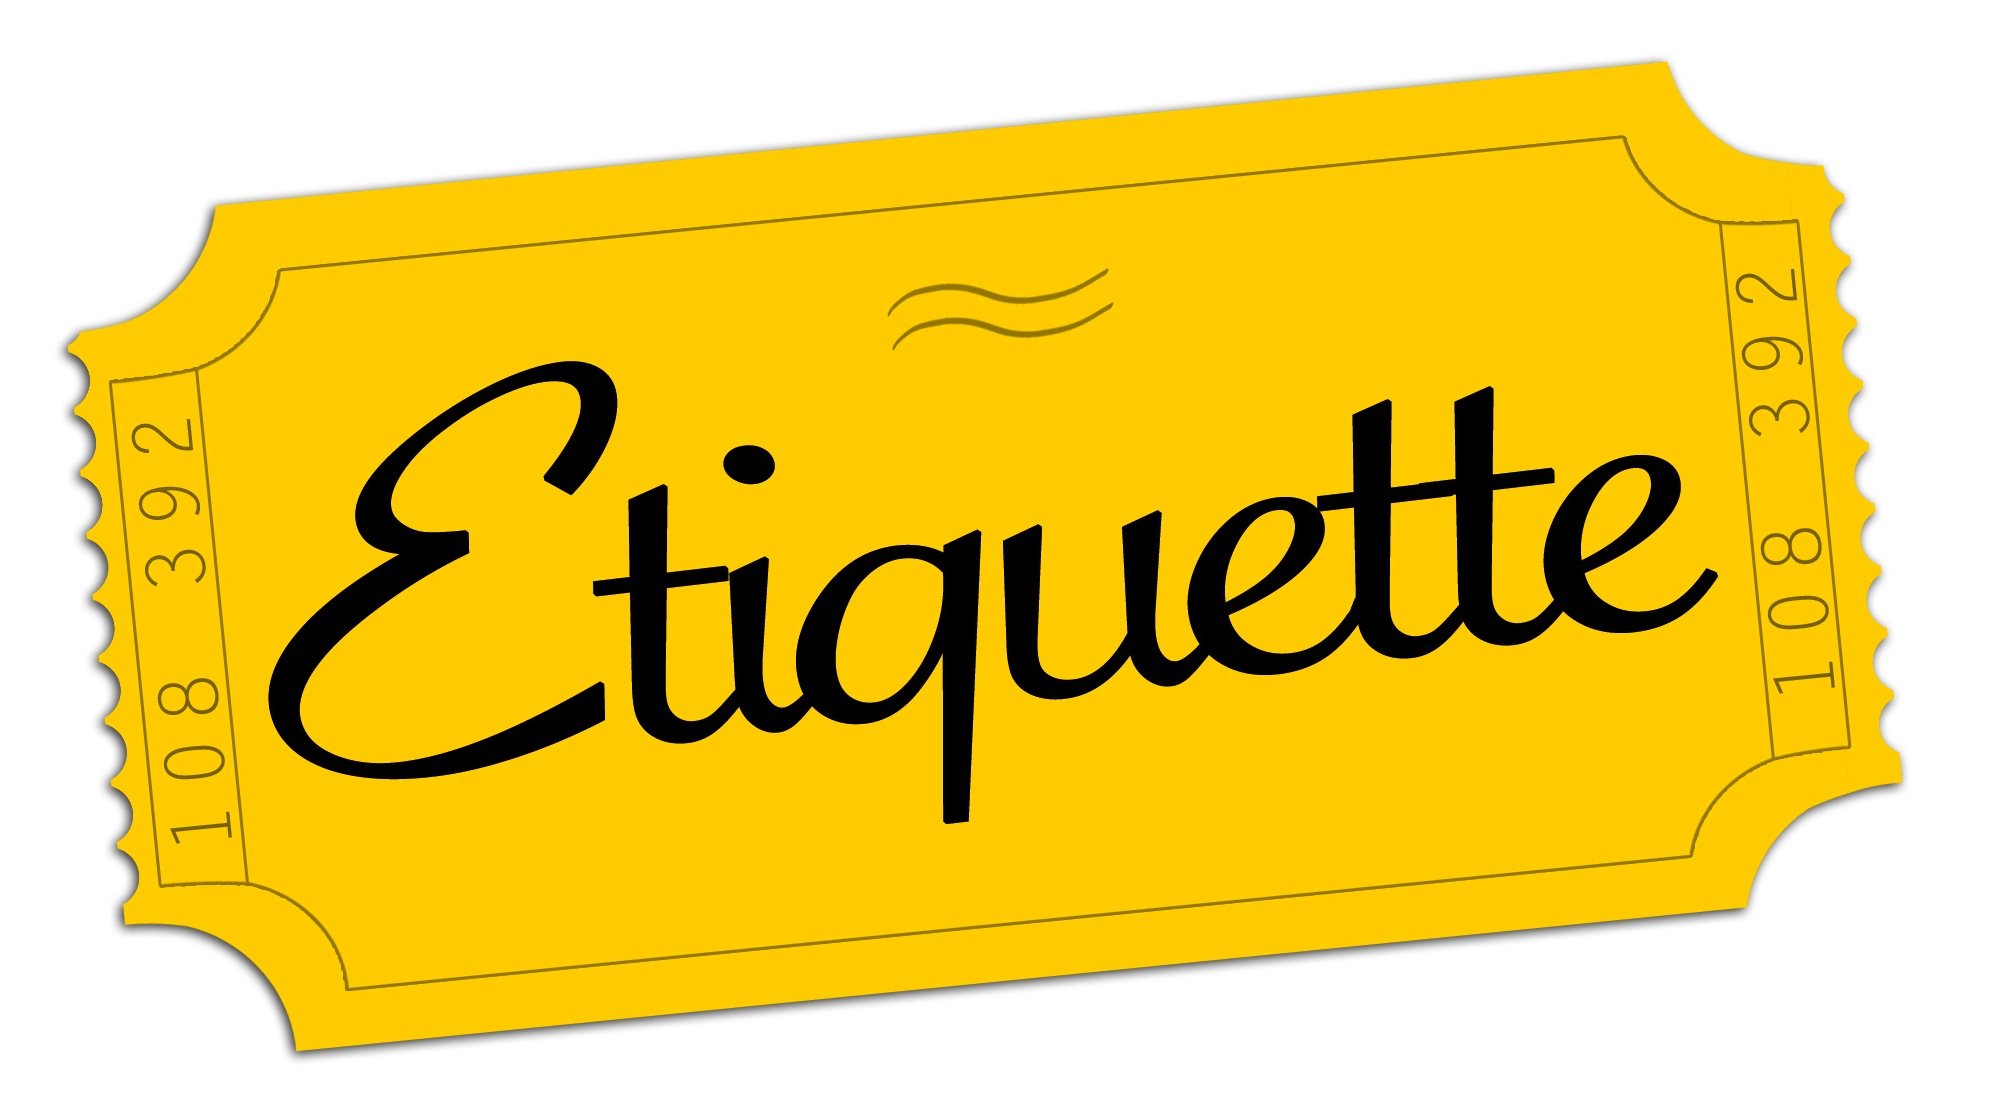 Equitte